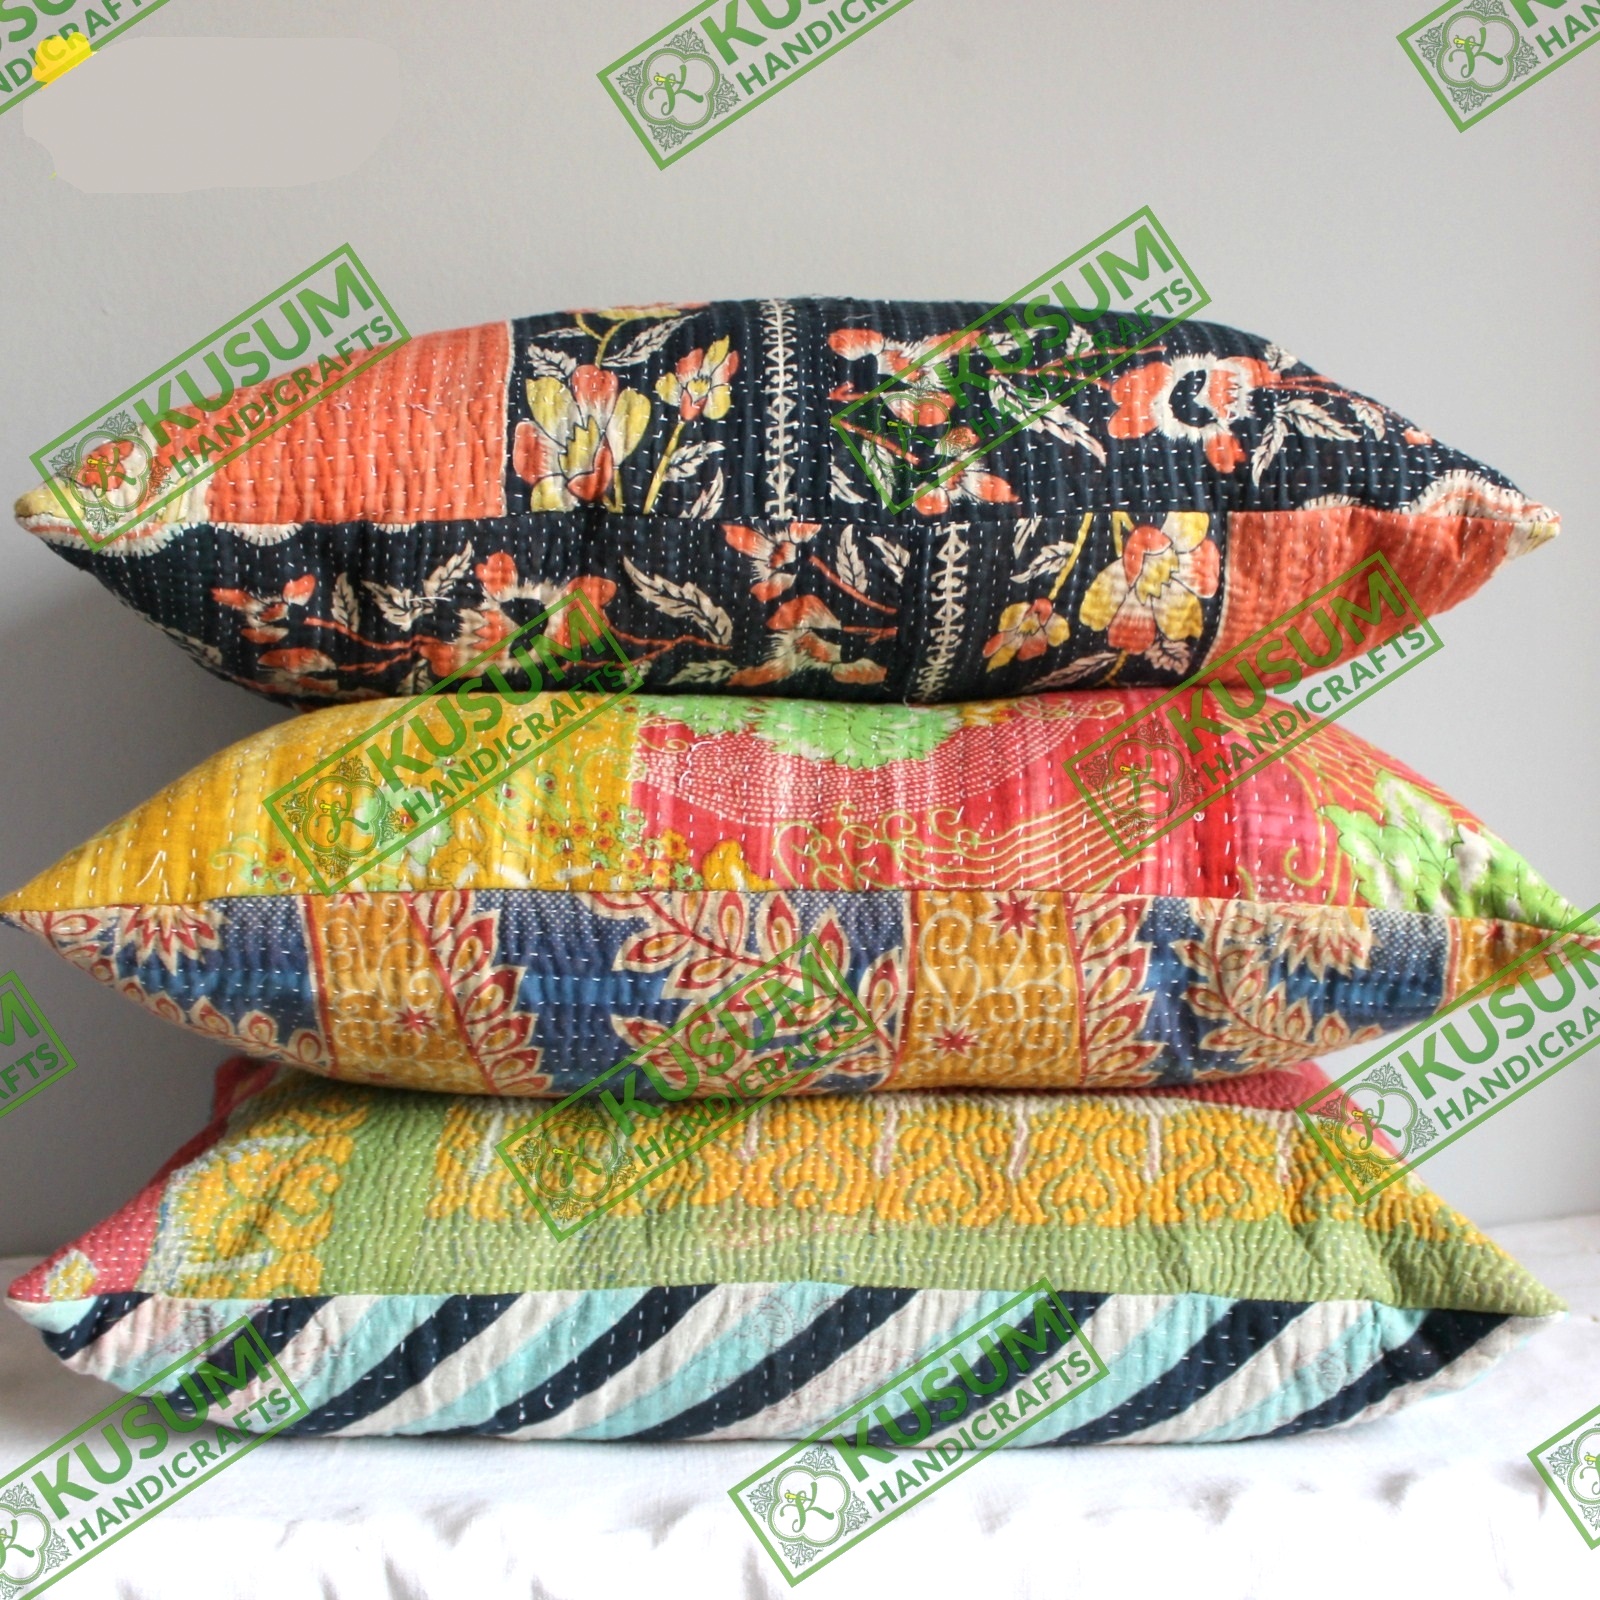 Beautiful Handmade Kantha Cushion Cover Fruit Print Cotton Ethnic Indian Hand Stitched Kantha Cushion Designer Pillows Throw Active